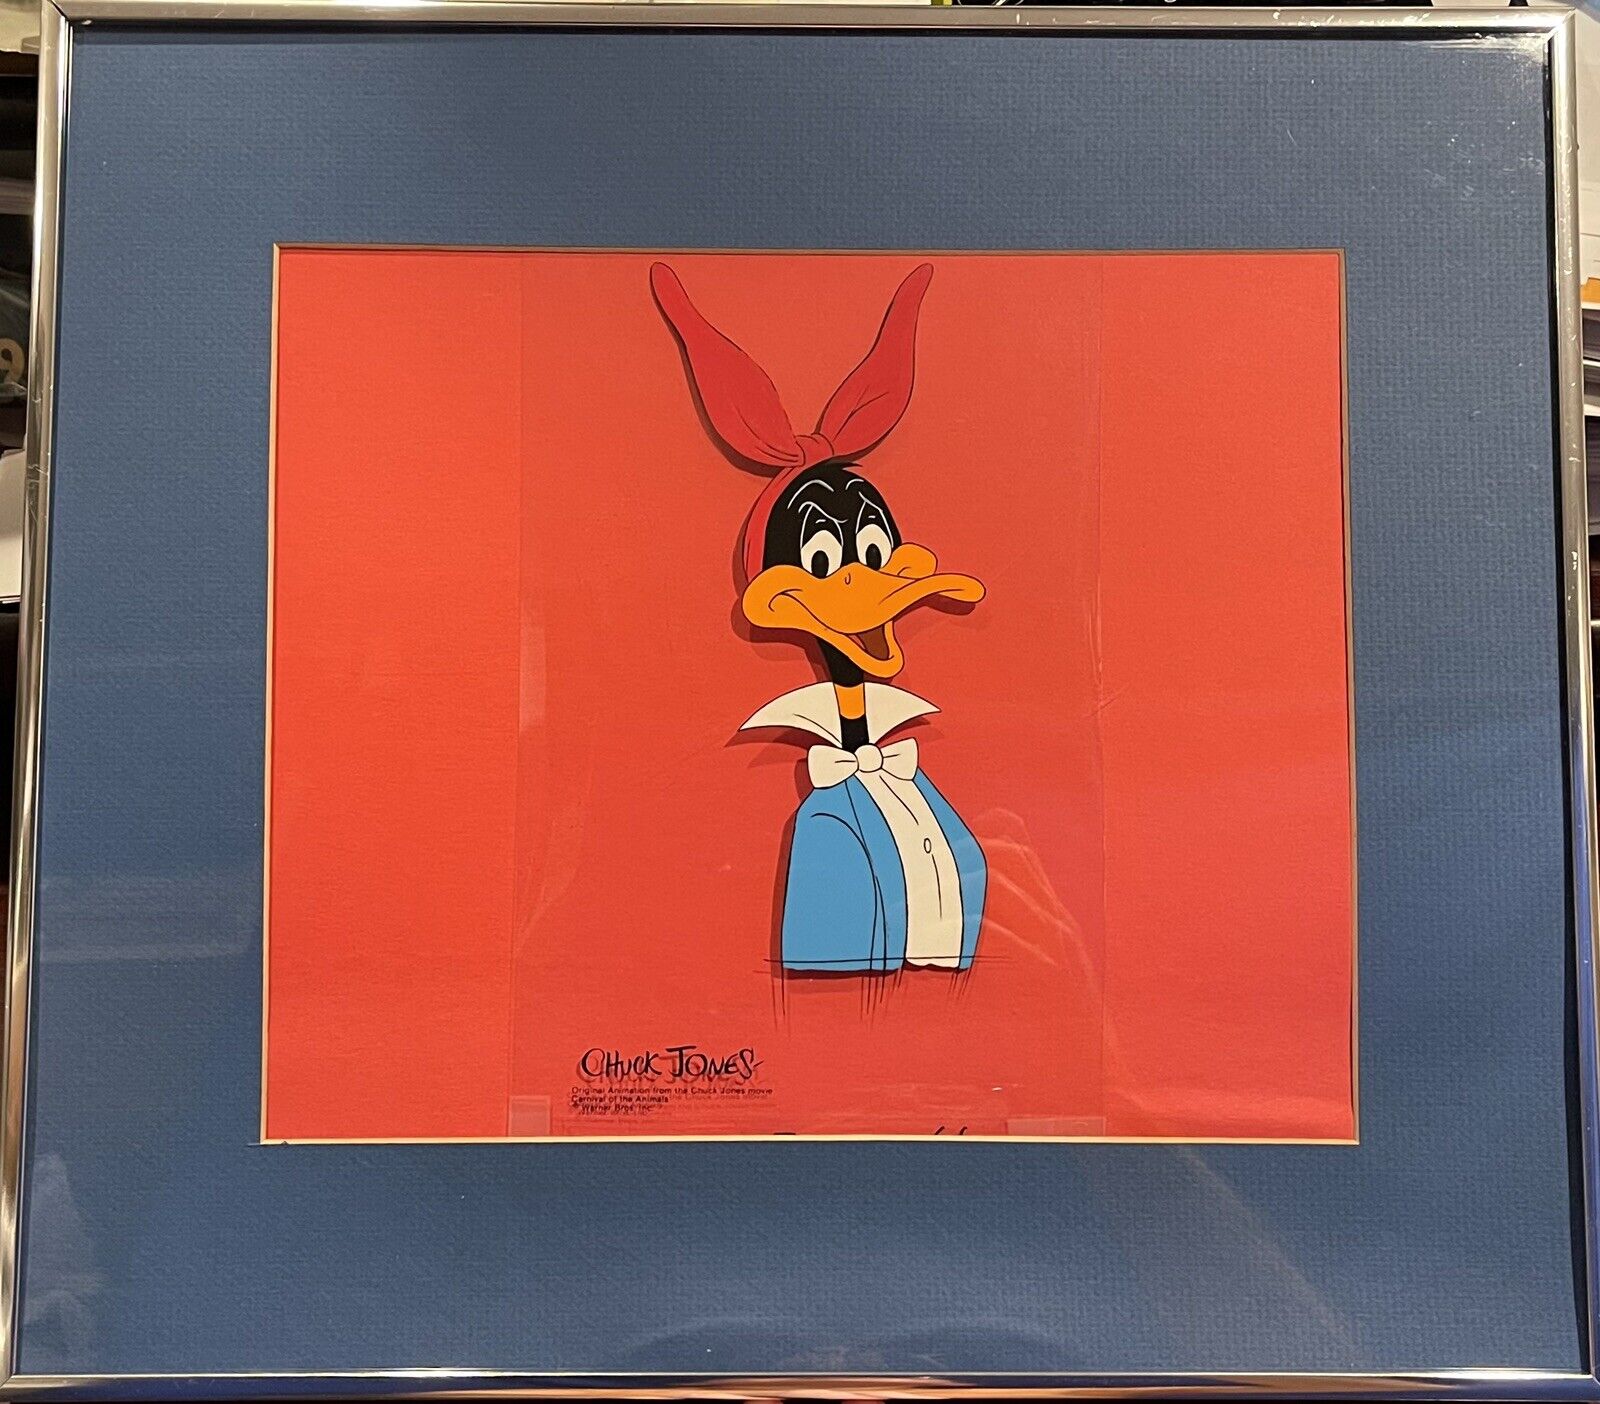 Daffy Duck Animation Production Cel From Carnival of the Animals-Chuck Jones1976